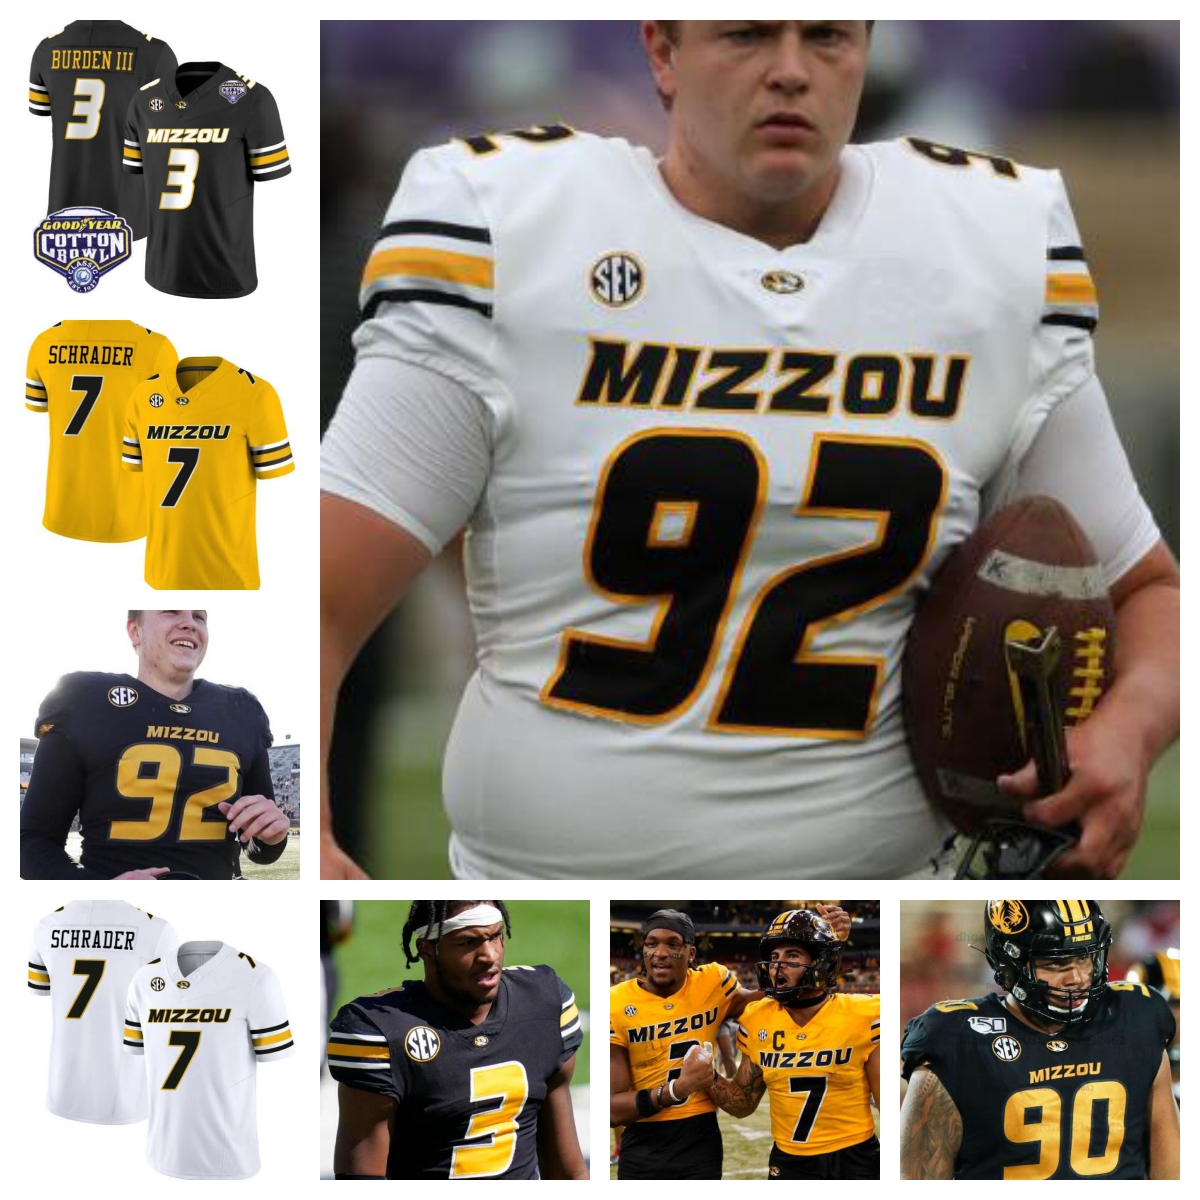 Personalize Missouri Football Jerseys NCAA College 8 Nathaniel Peat 3 Luther Burden III 5 Mookie Cooper 12 Brady Cook Mens Mulheres Juventude todos costurados QUALQUER NOME QUALQUER NÚMERO